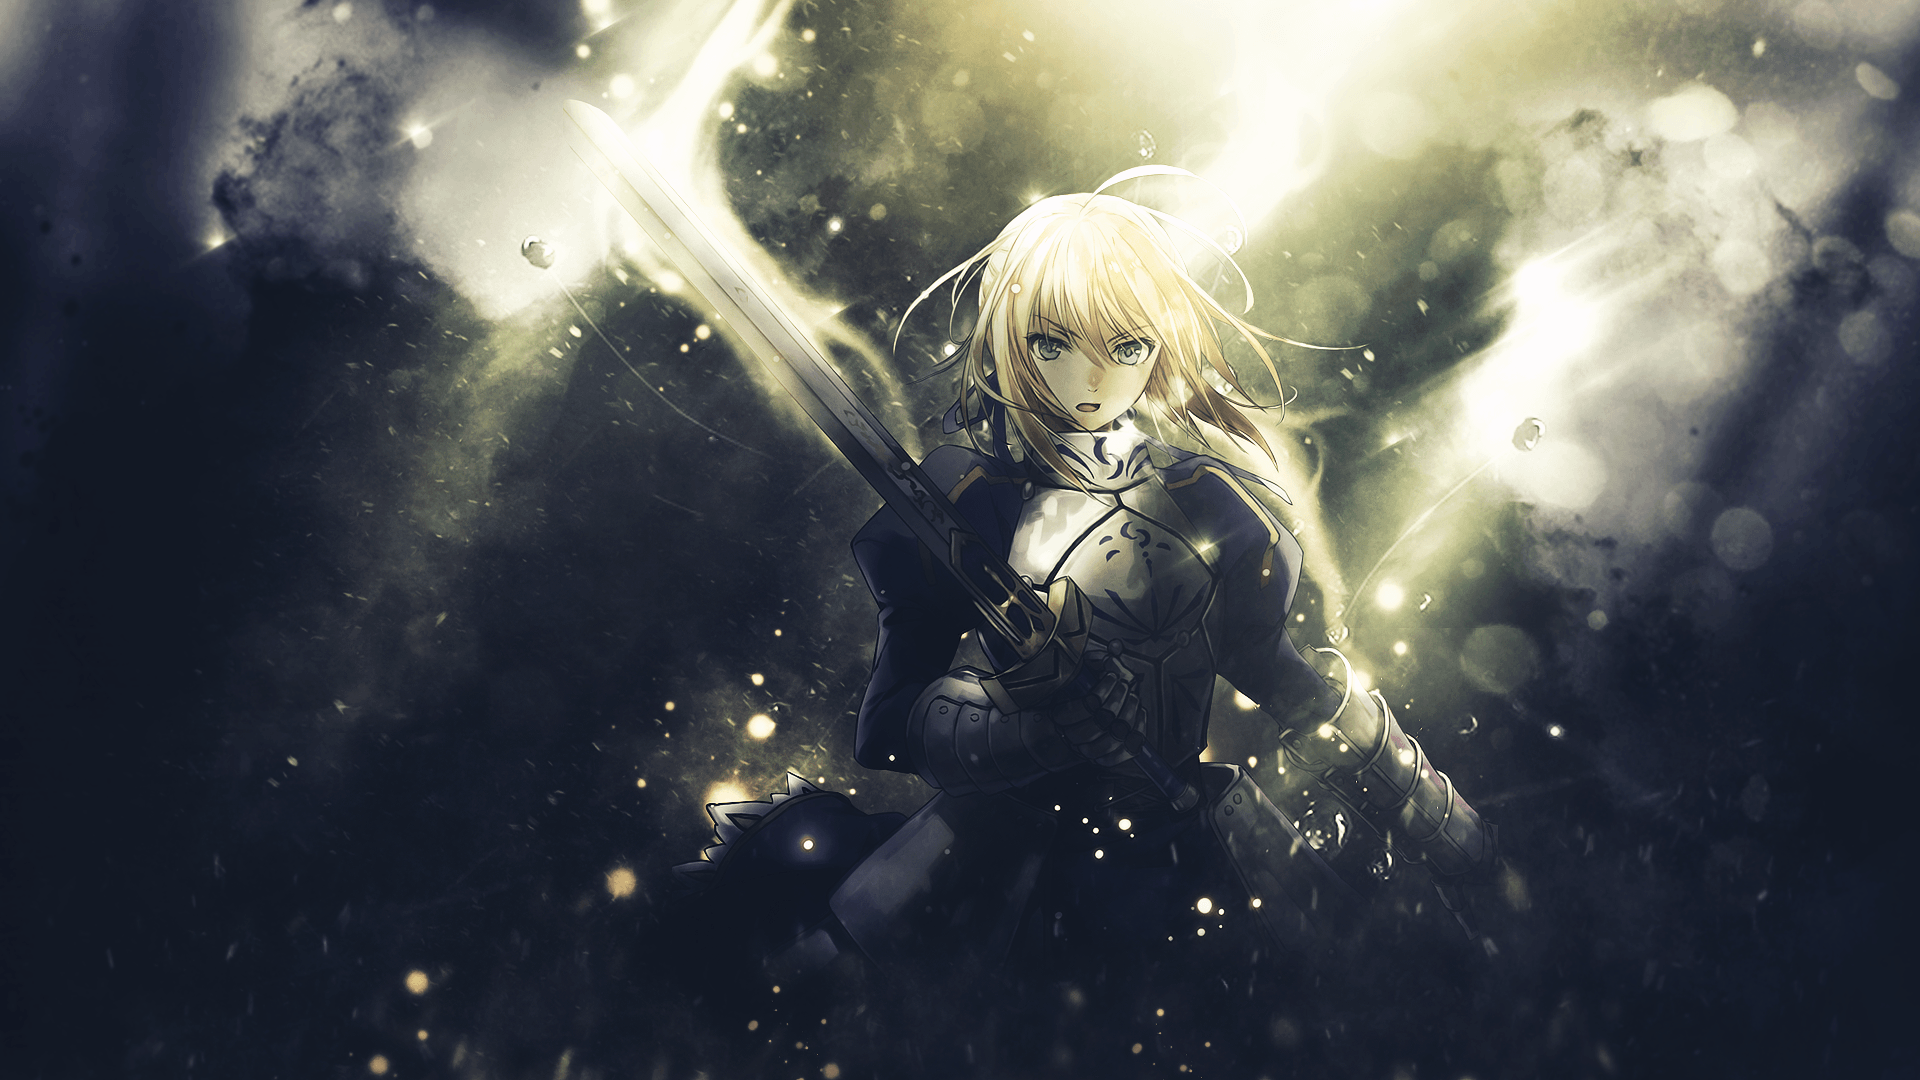 Fate Zero Wallpapers for PC